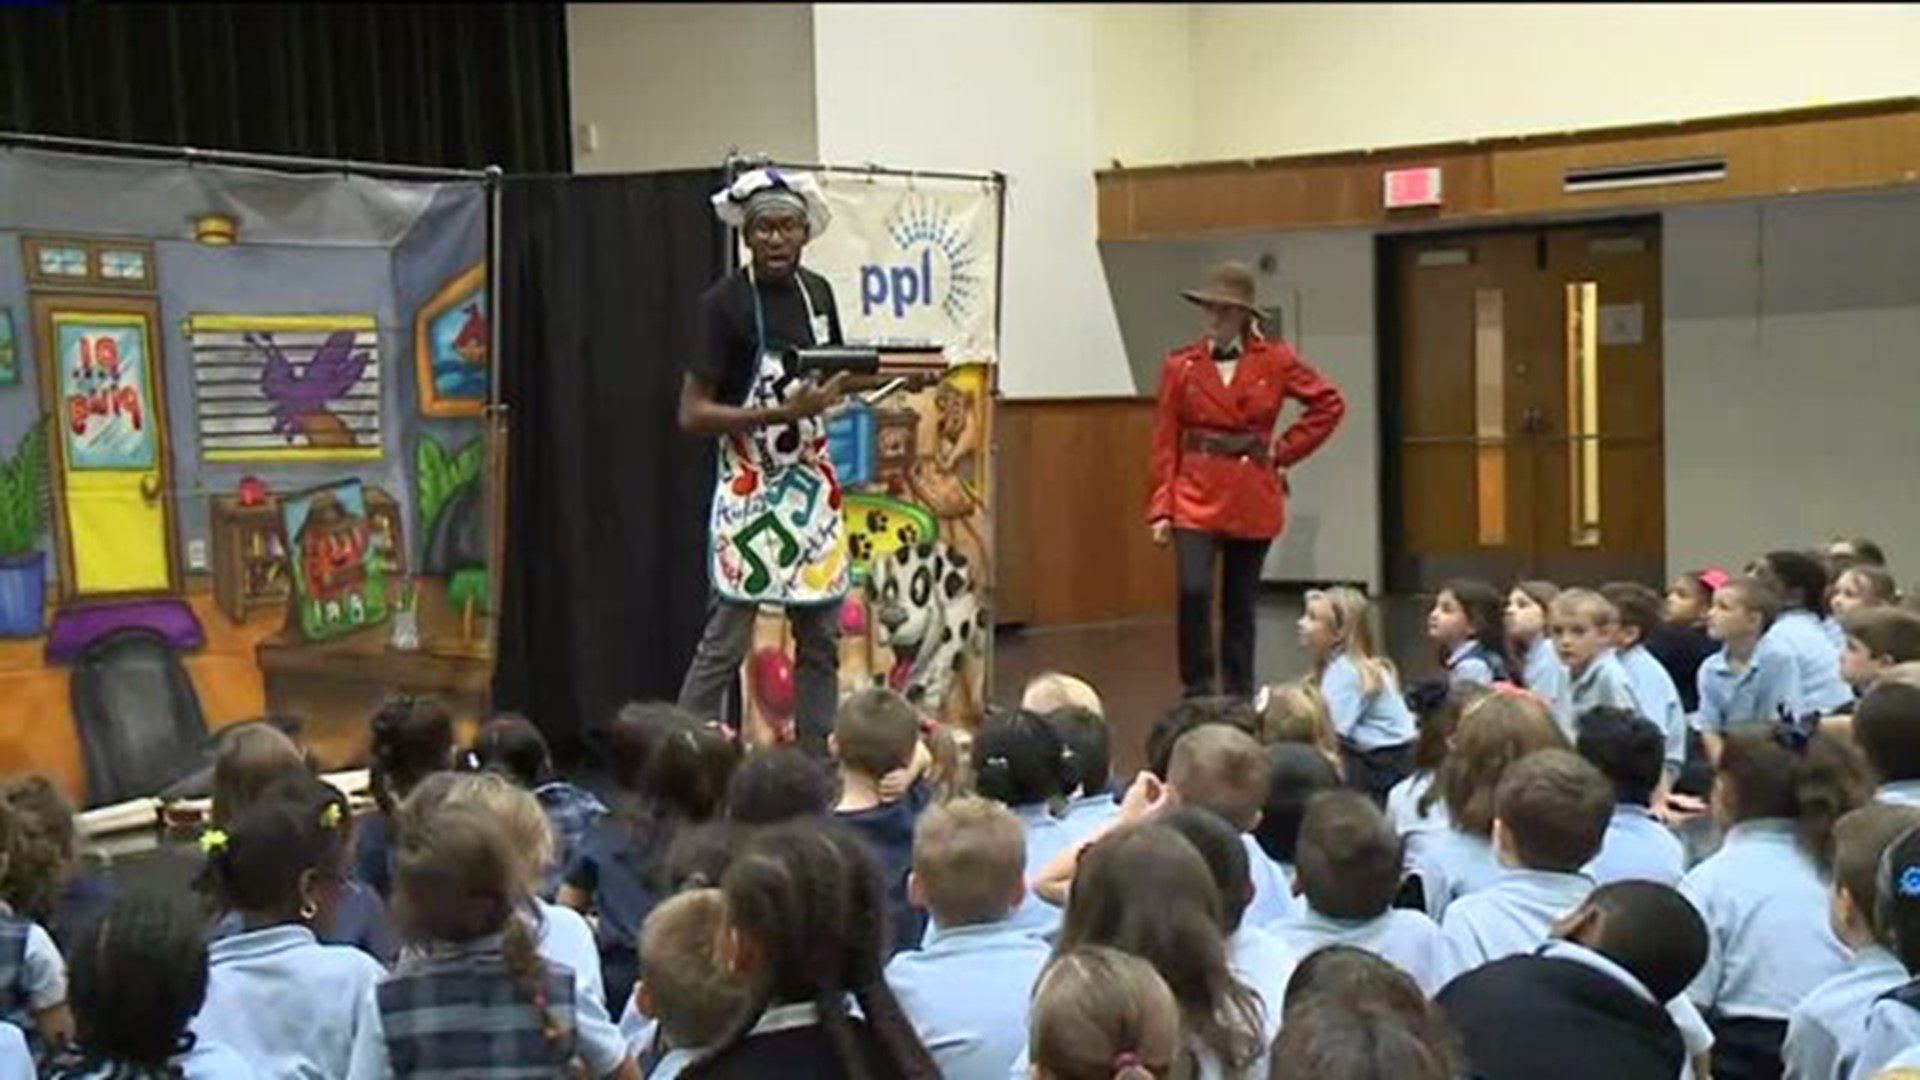 Monroe County Students Learn about Electrical Safety through Drama